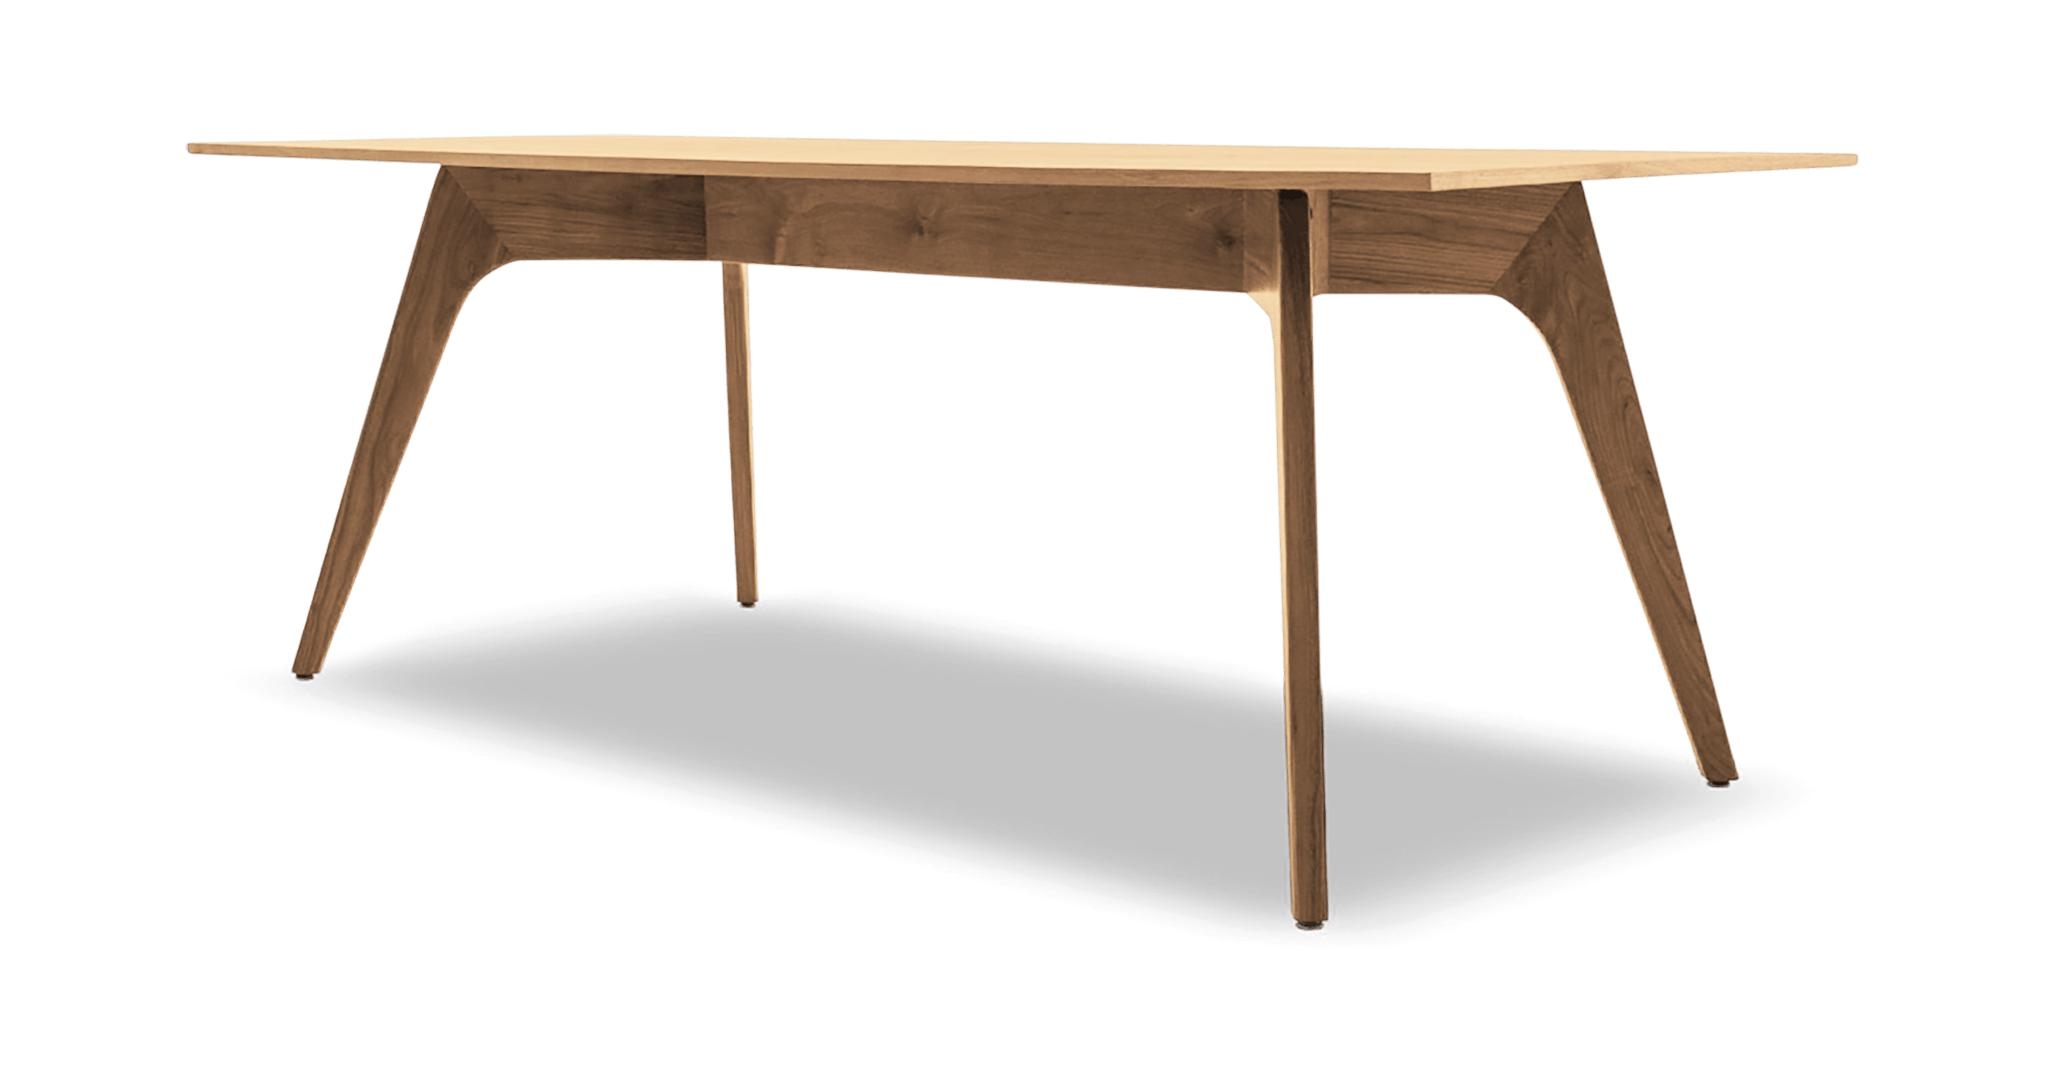 Hesse Mid Century Modern (Wood Top) Dining Table - Cherry - Image 3